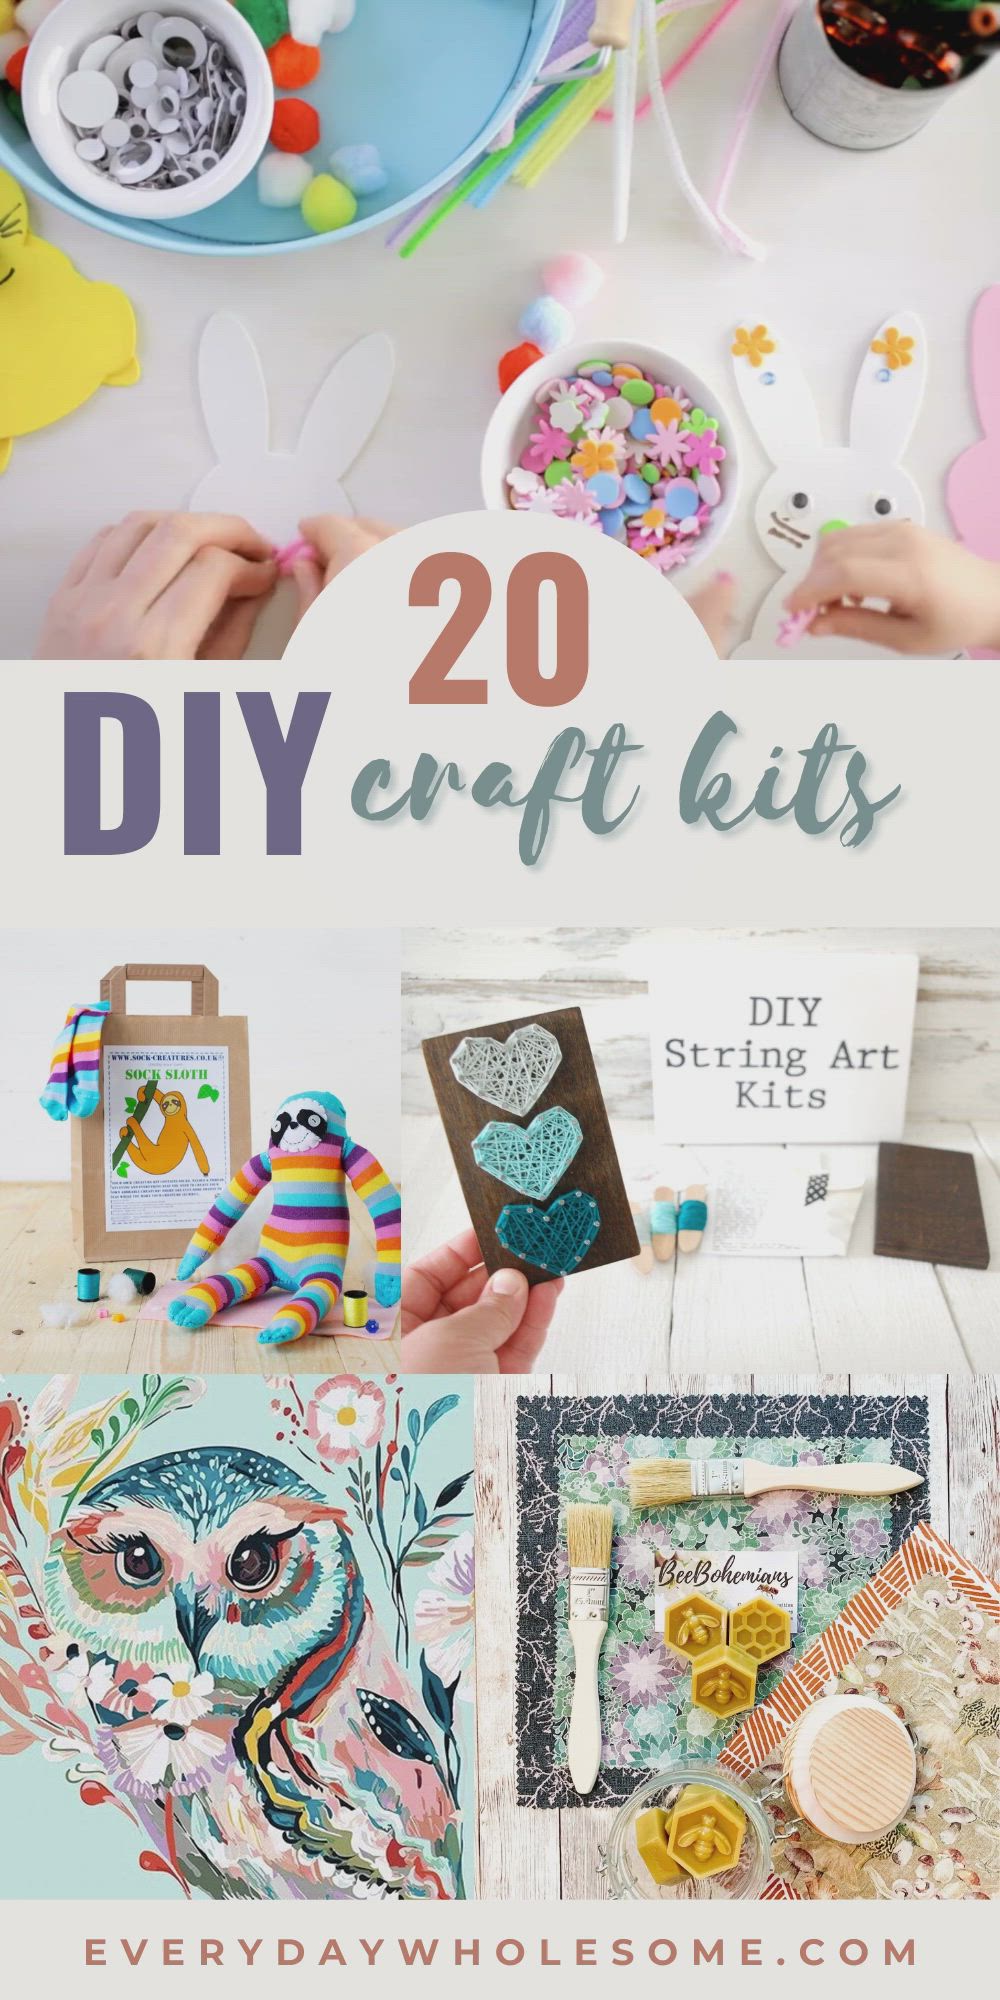 This contains: 20 Best DIY Craft Kits for kids, teens & adults including crafts that are painting, crochet, string art, weaving, felting, looming, loom, beeswax, carving, whittling, mosaic, jewlery and bracelet making, paint by number, concrete planters, macrame, sock craft kit, moss, wall art, rag wall art, and dream catchers.